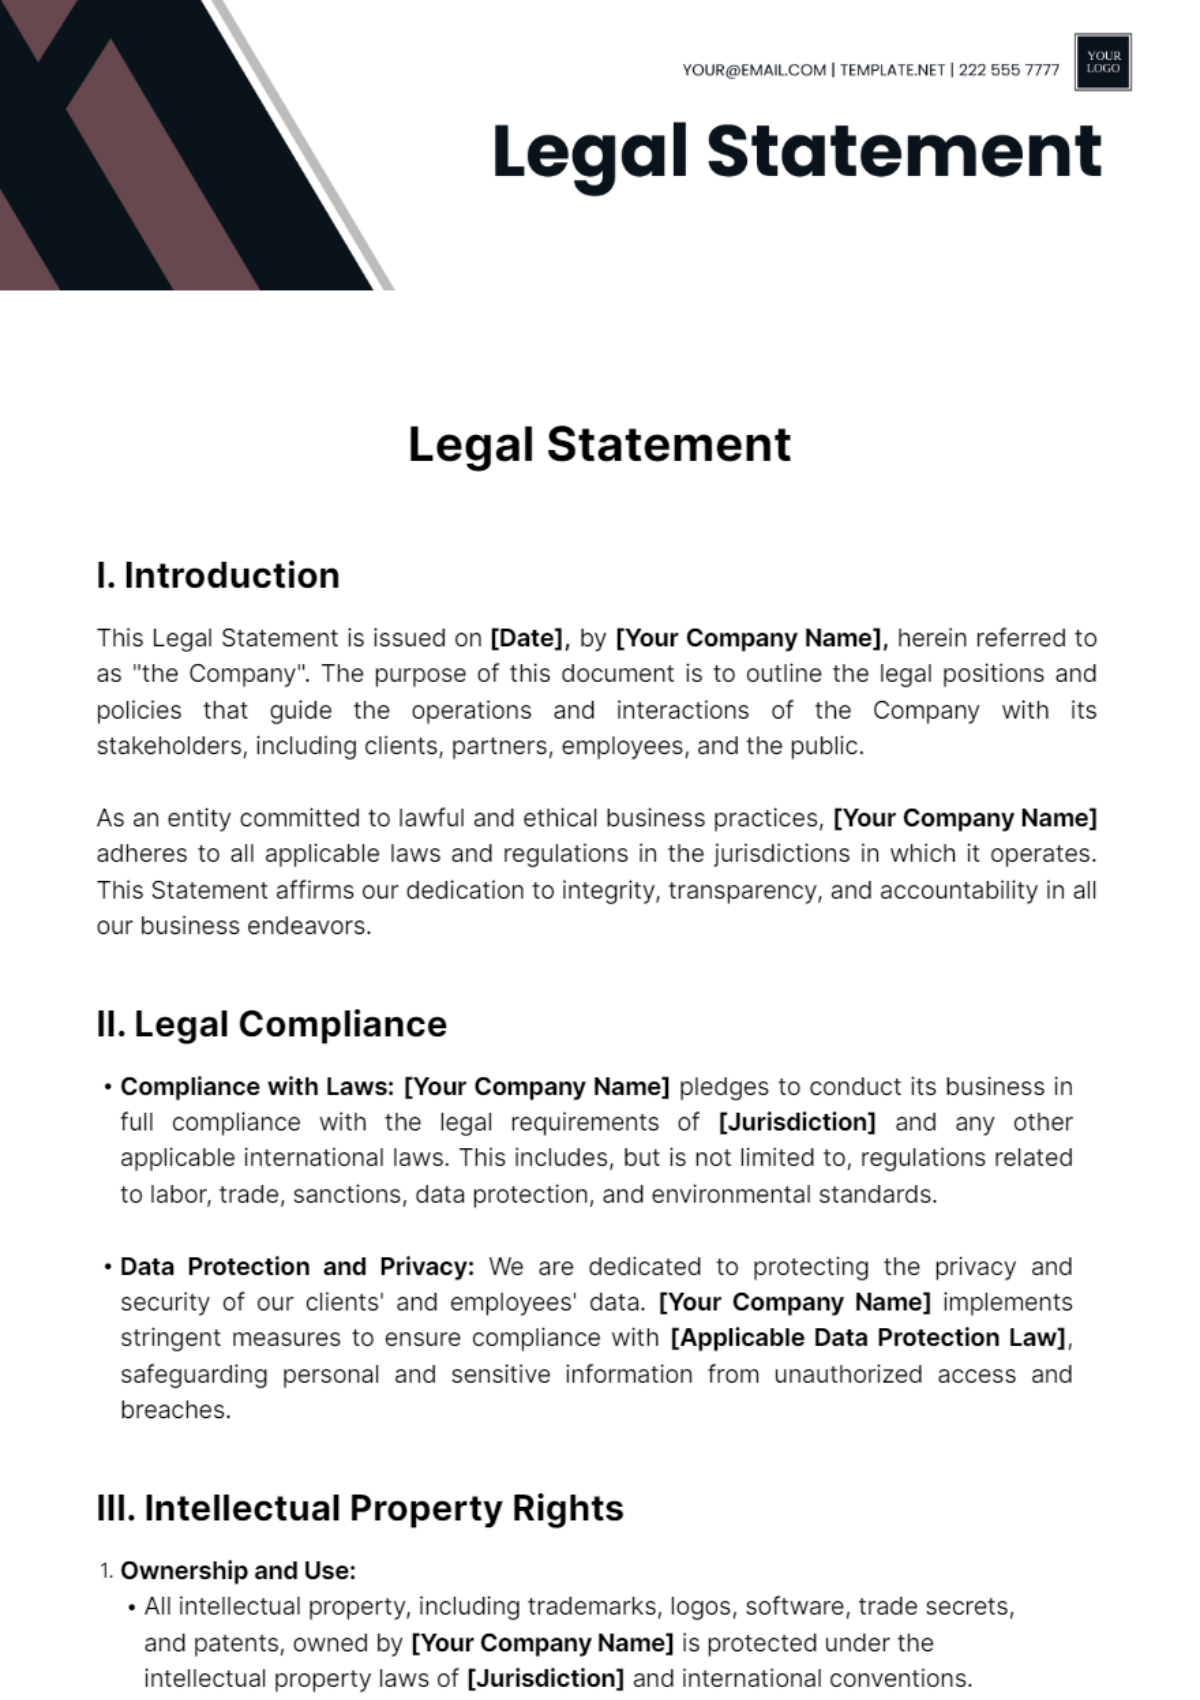 Legal Statement Template